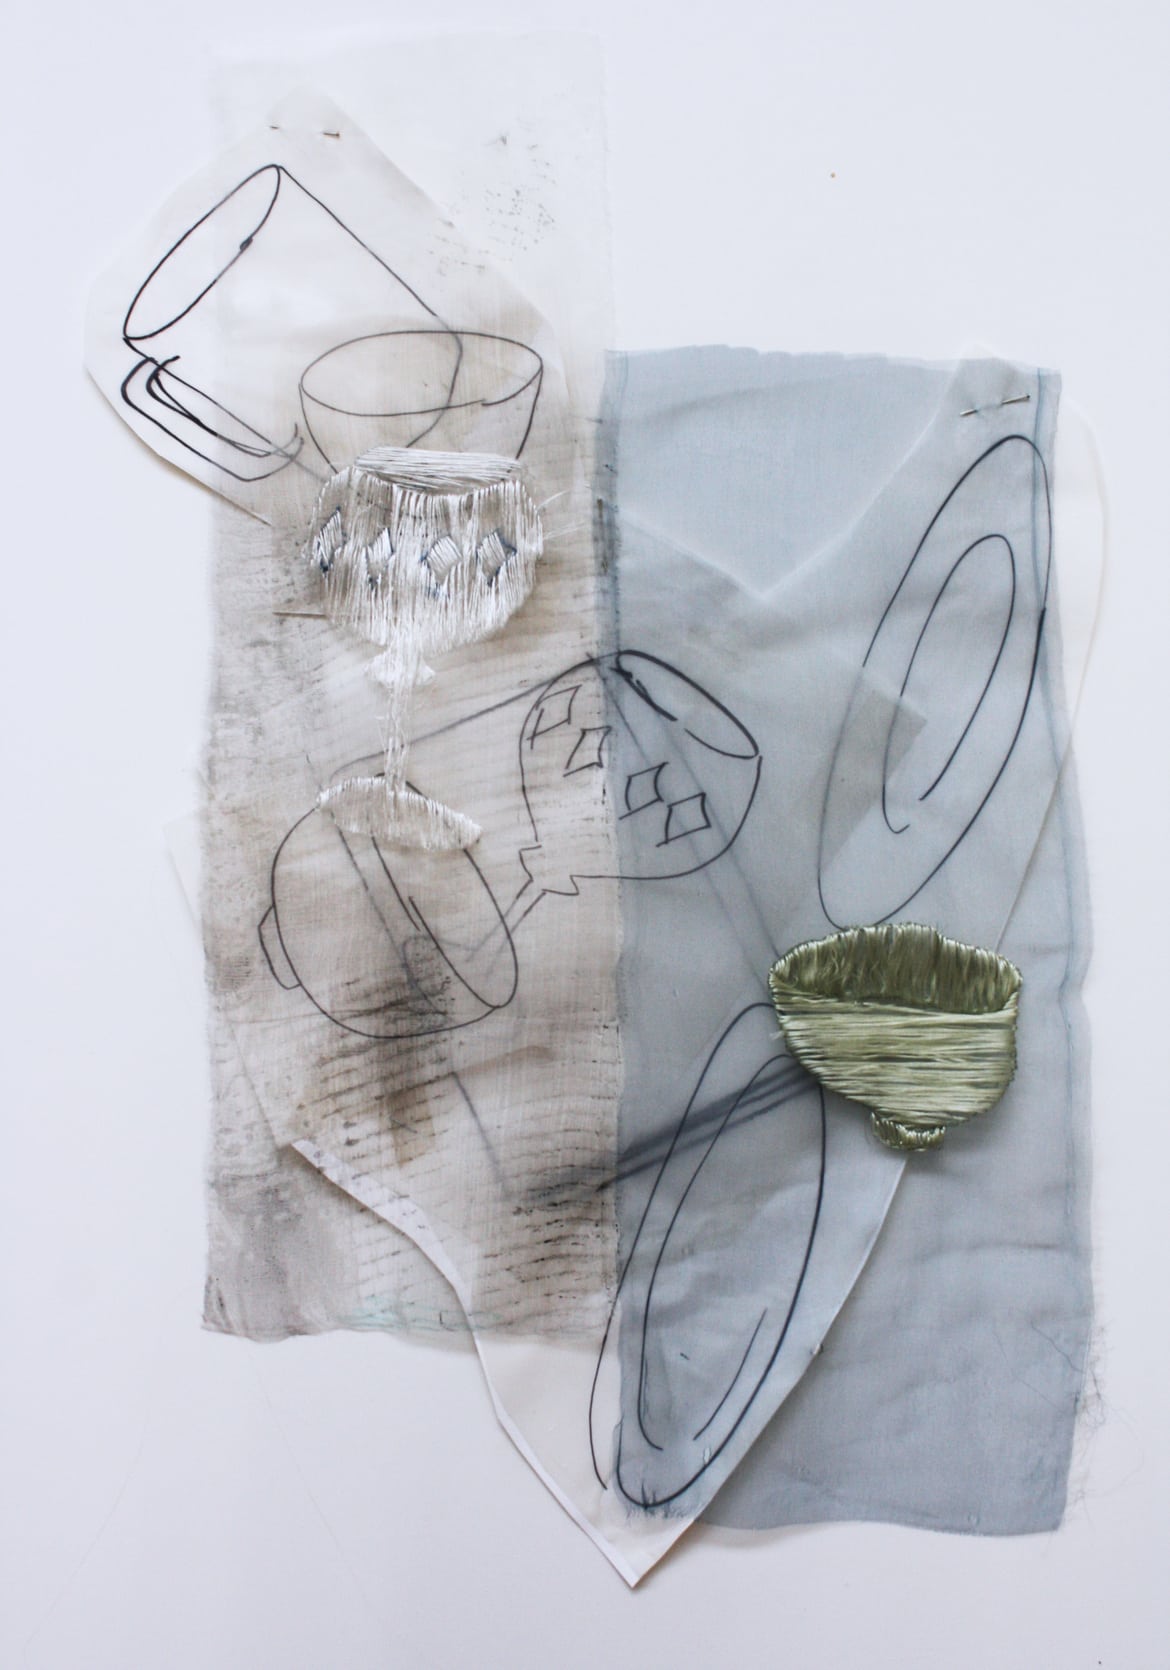 ‘The time to stop 3’, 2014, paper, drawing with permanent pen, Italian coloured synthetic cloth, Japanese silk thread, 45x61cm